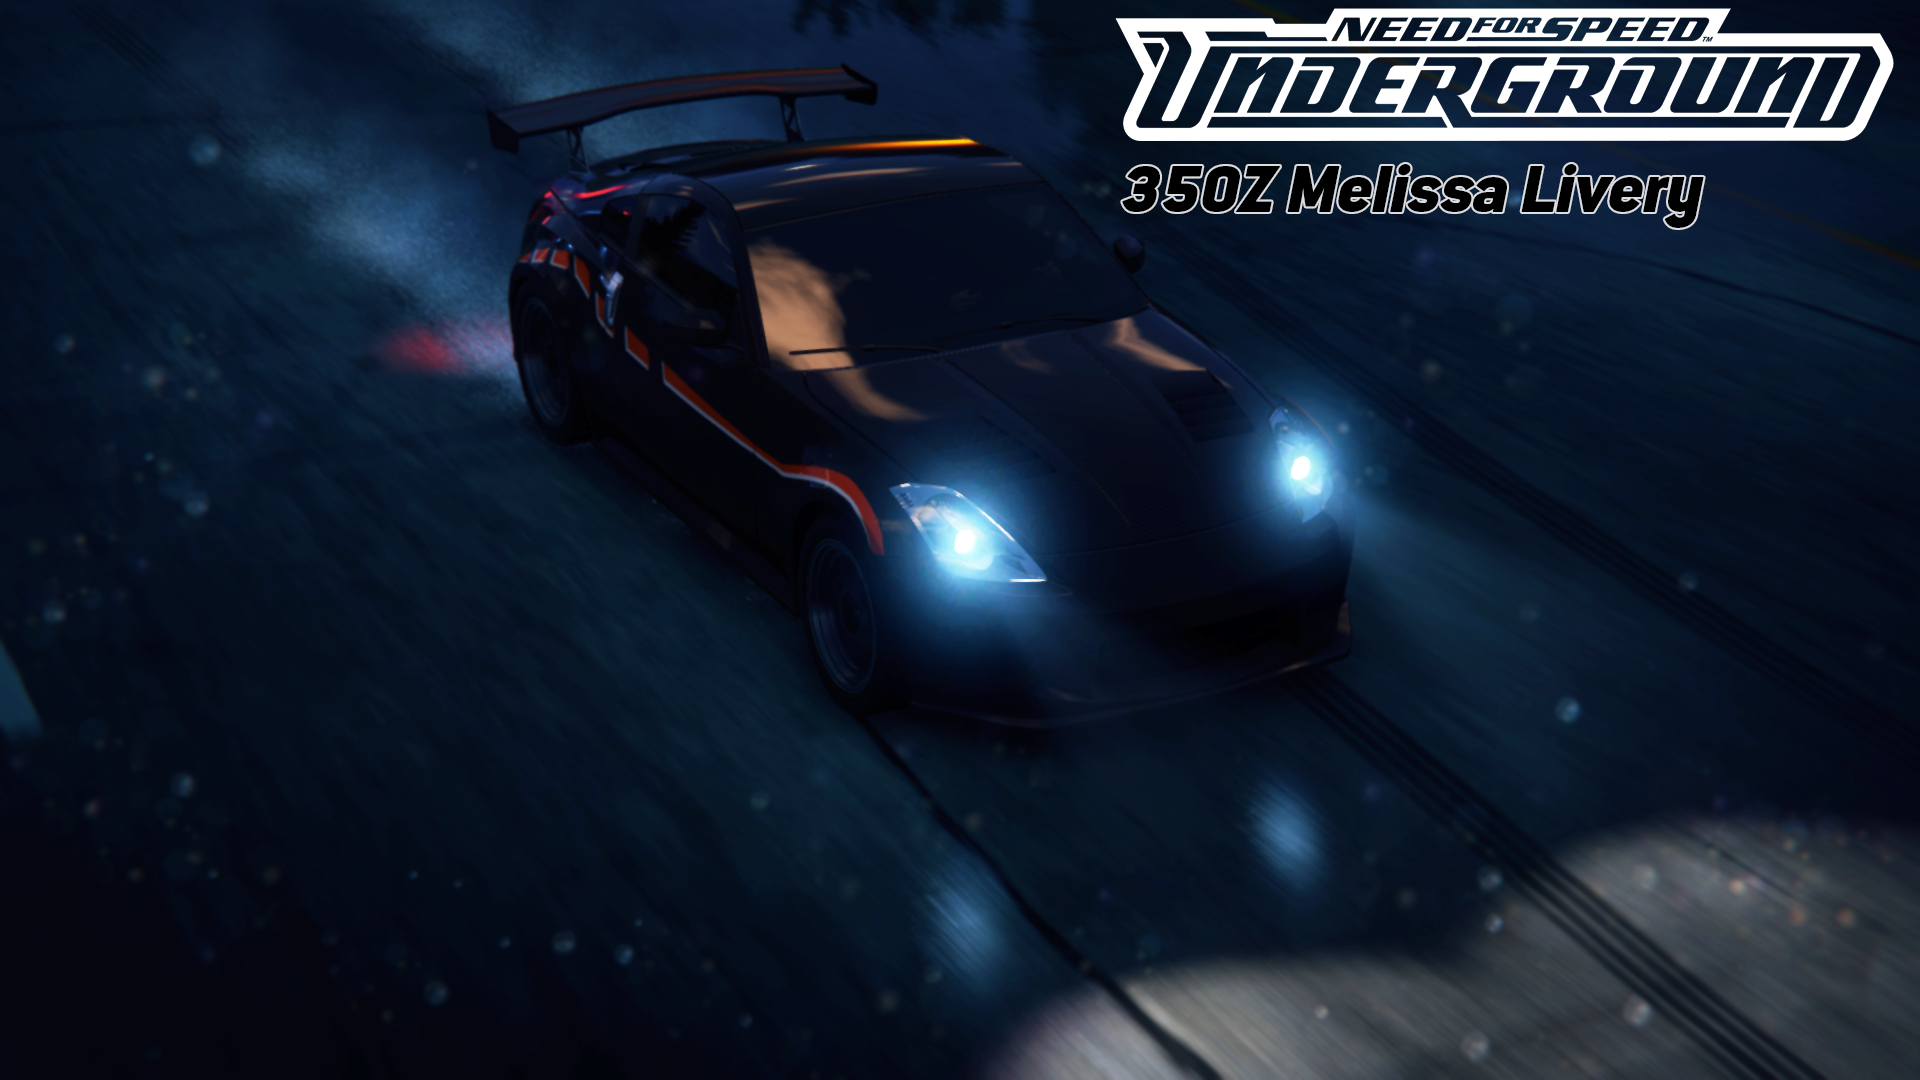 Need For Speed Most Wanted 2012 Nissan 350z Melissa Livery